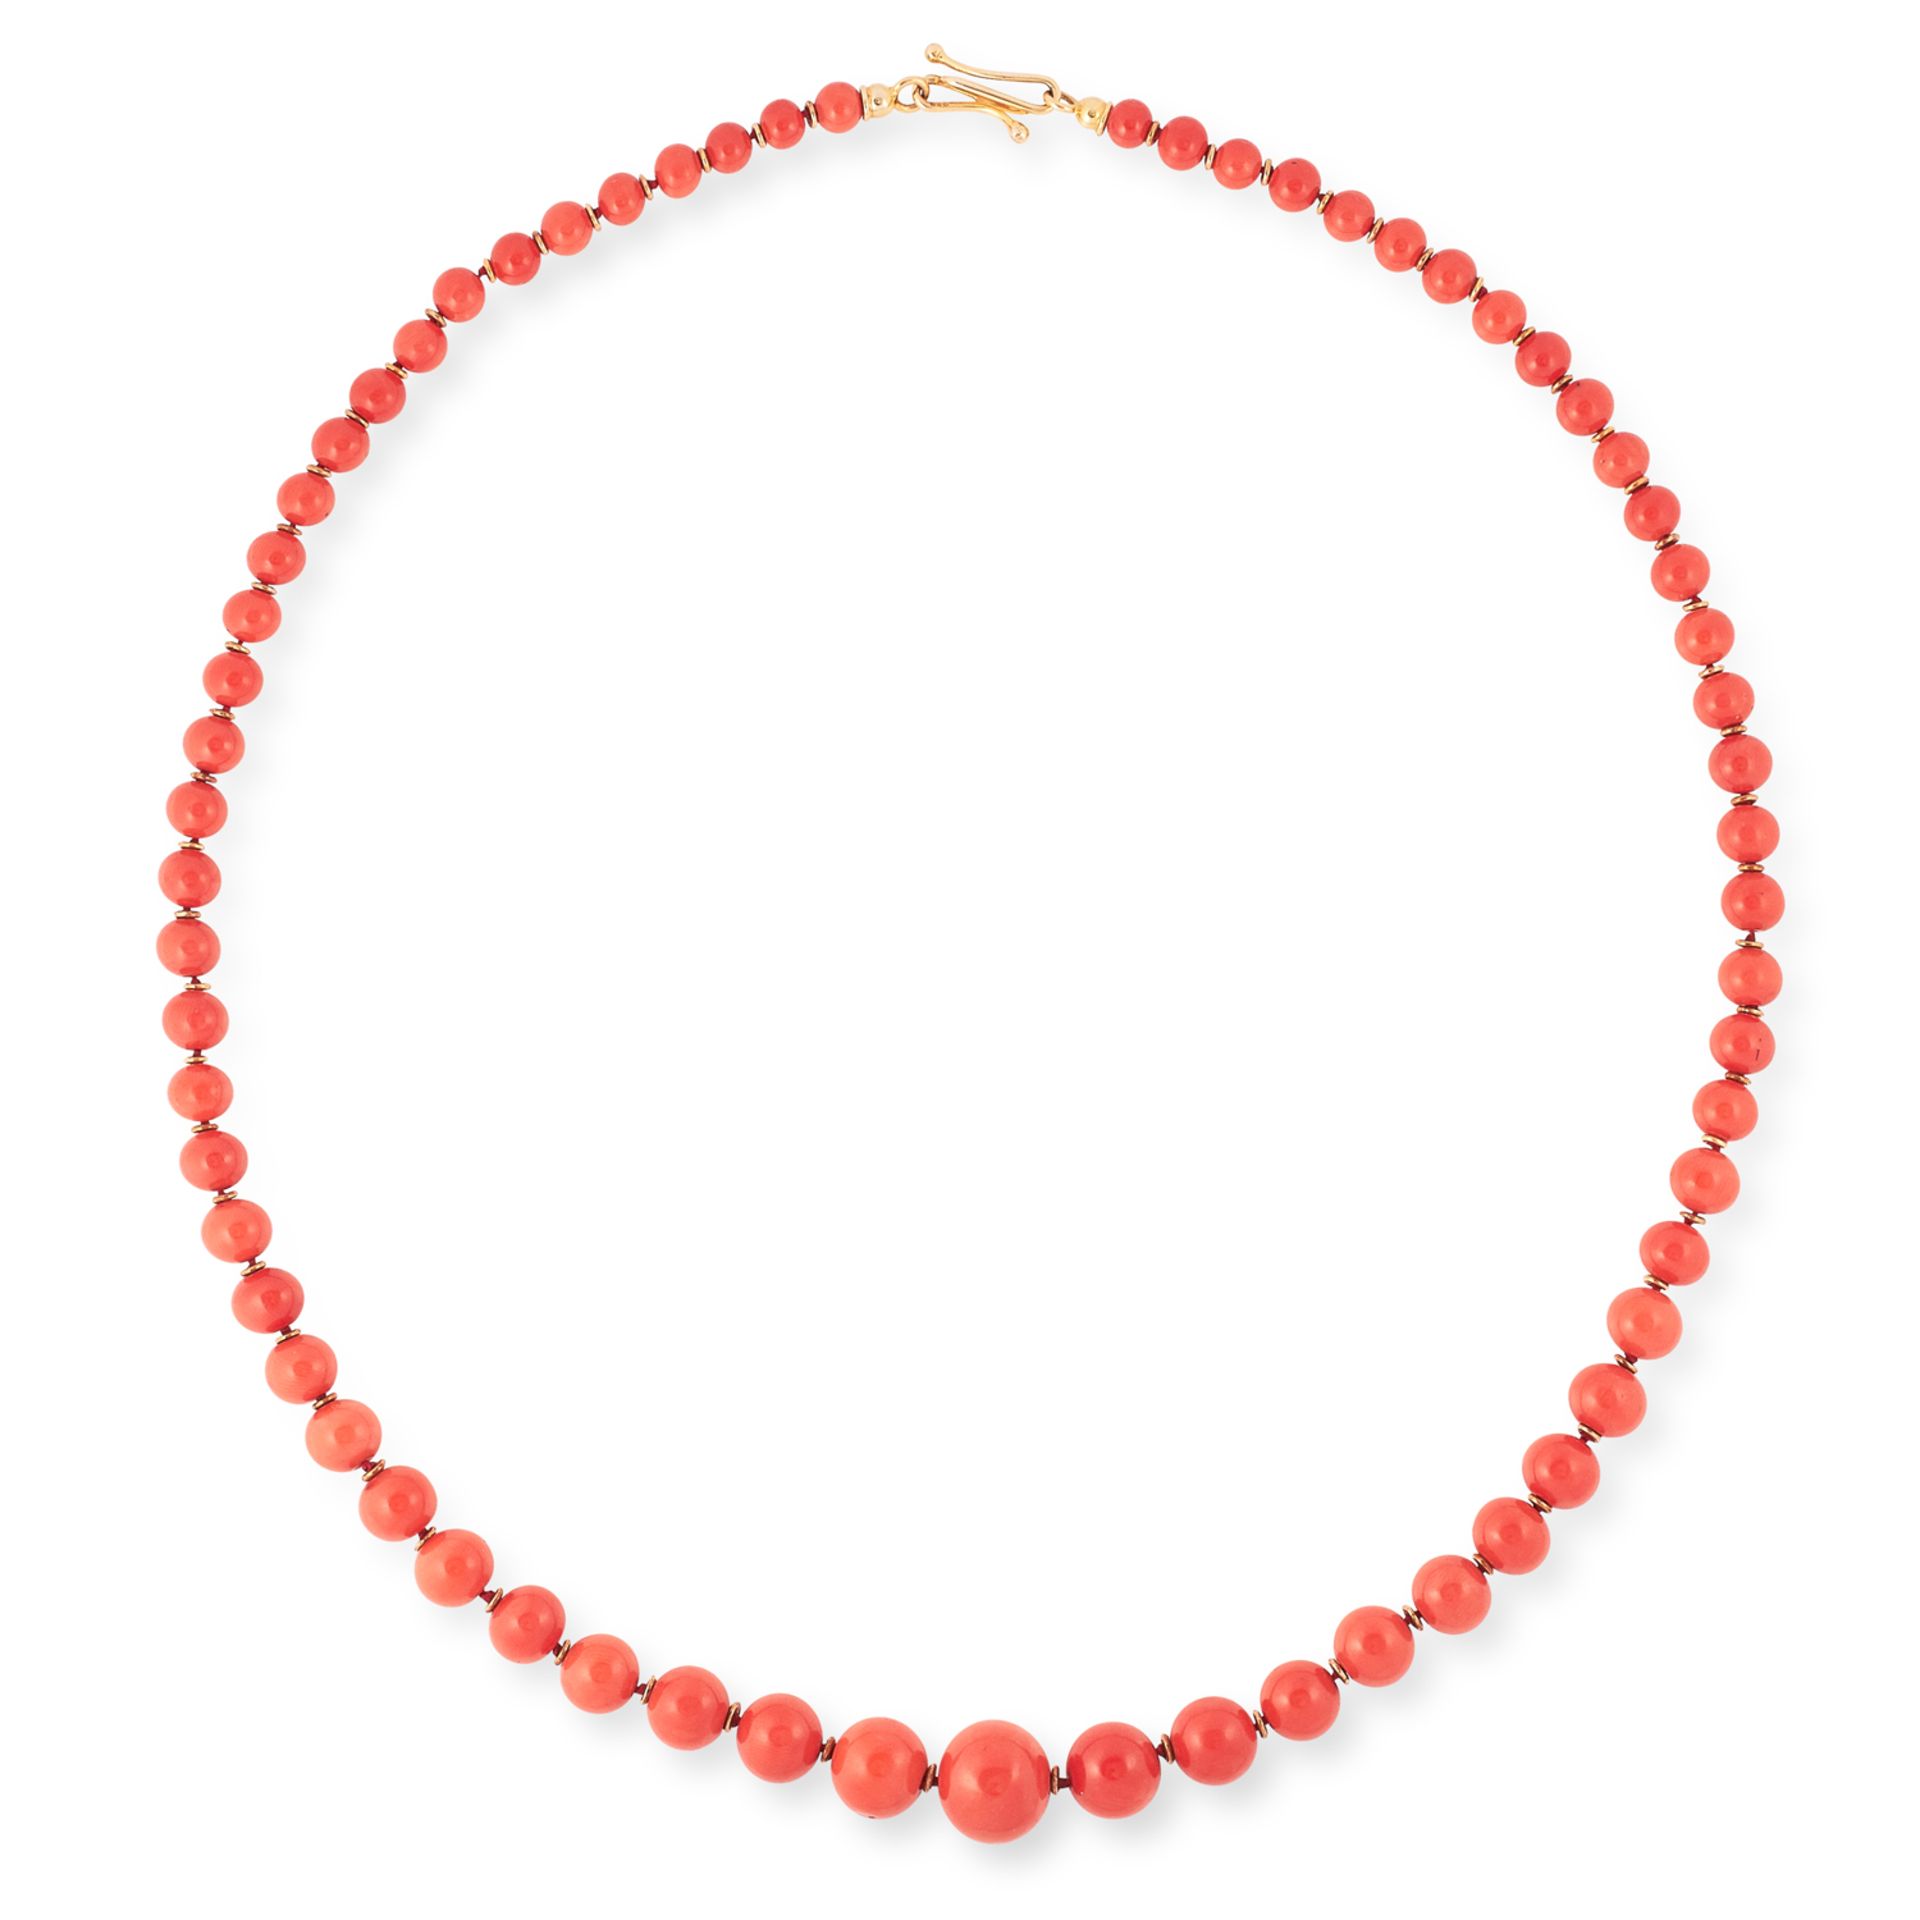 A CORAL AND DIAMOND NECKLACE comprising a single row of sixty-six graduated round coral beads